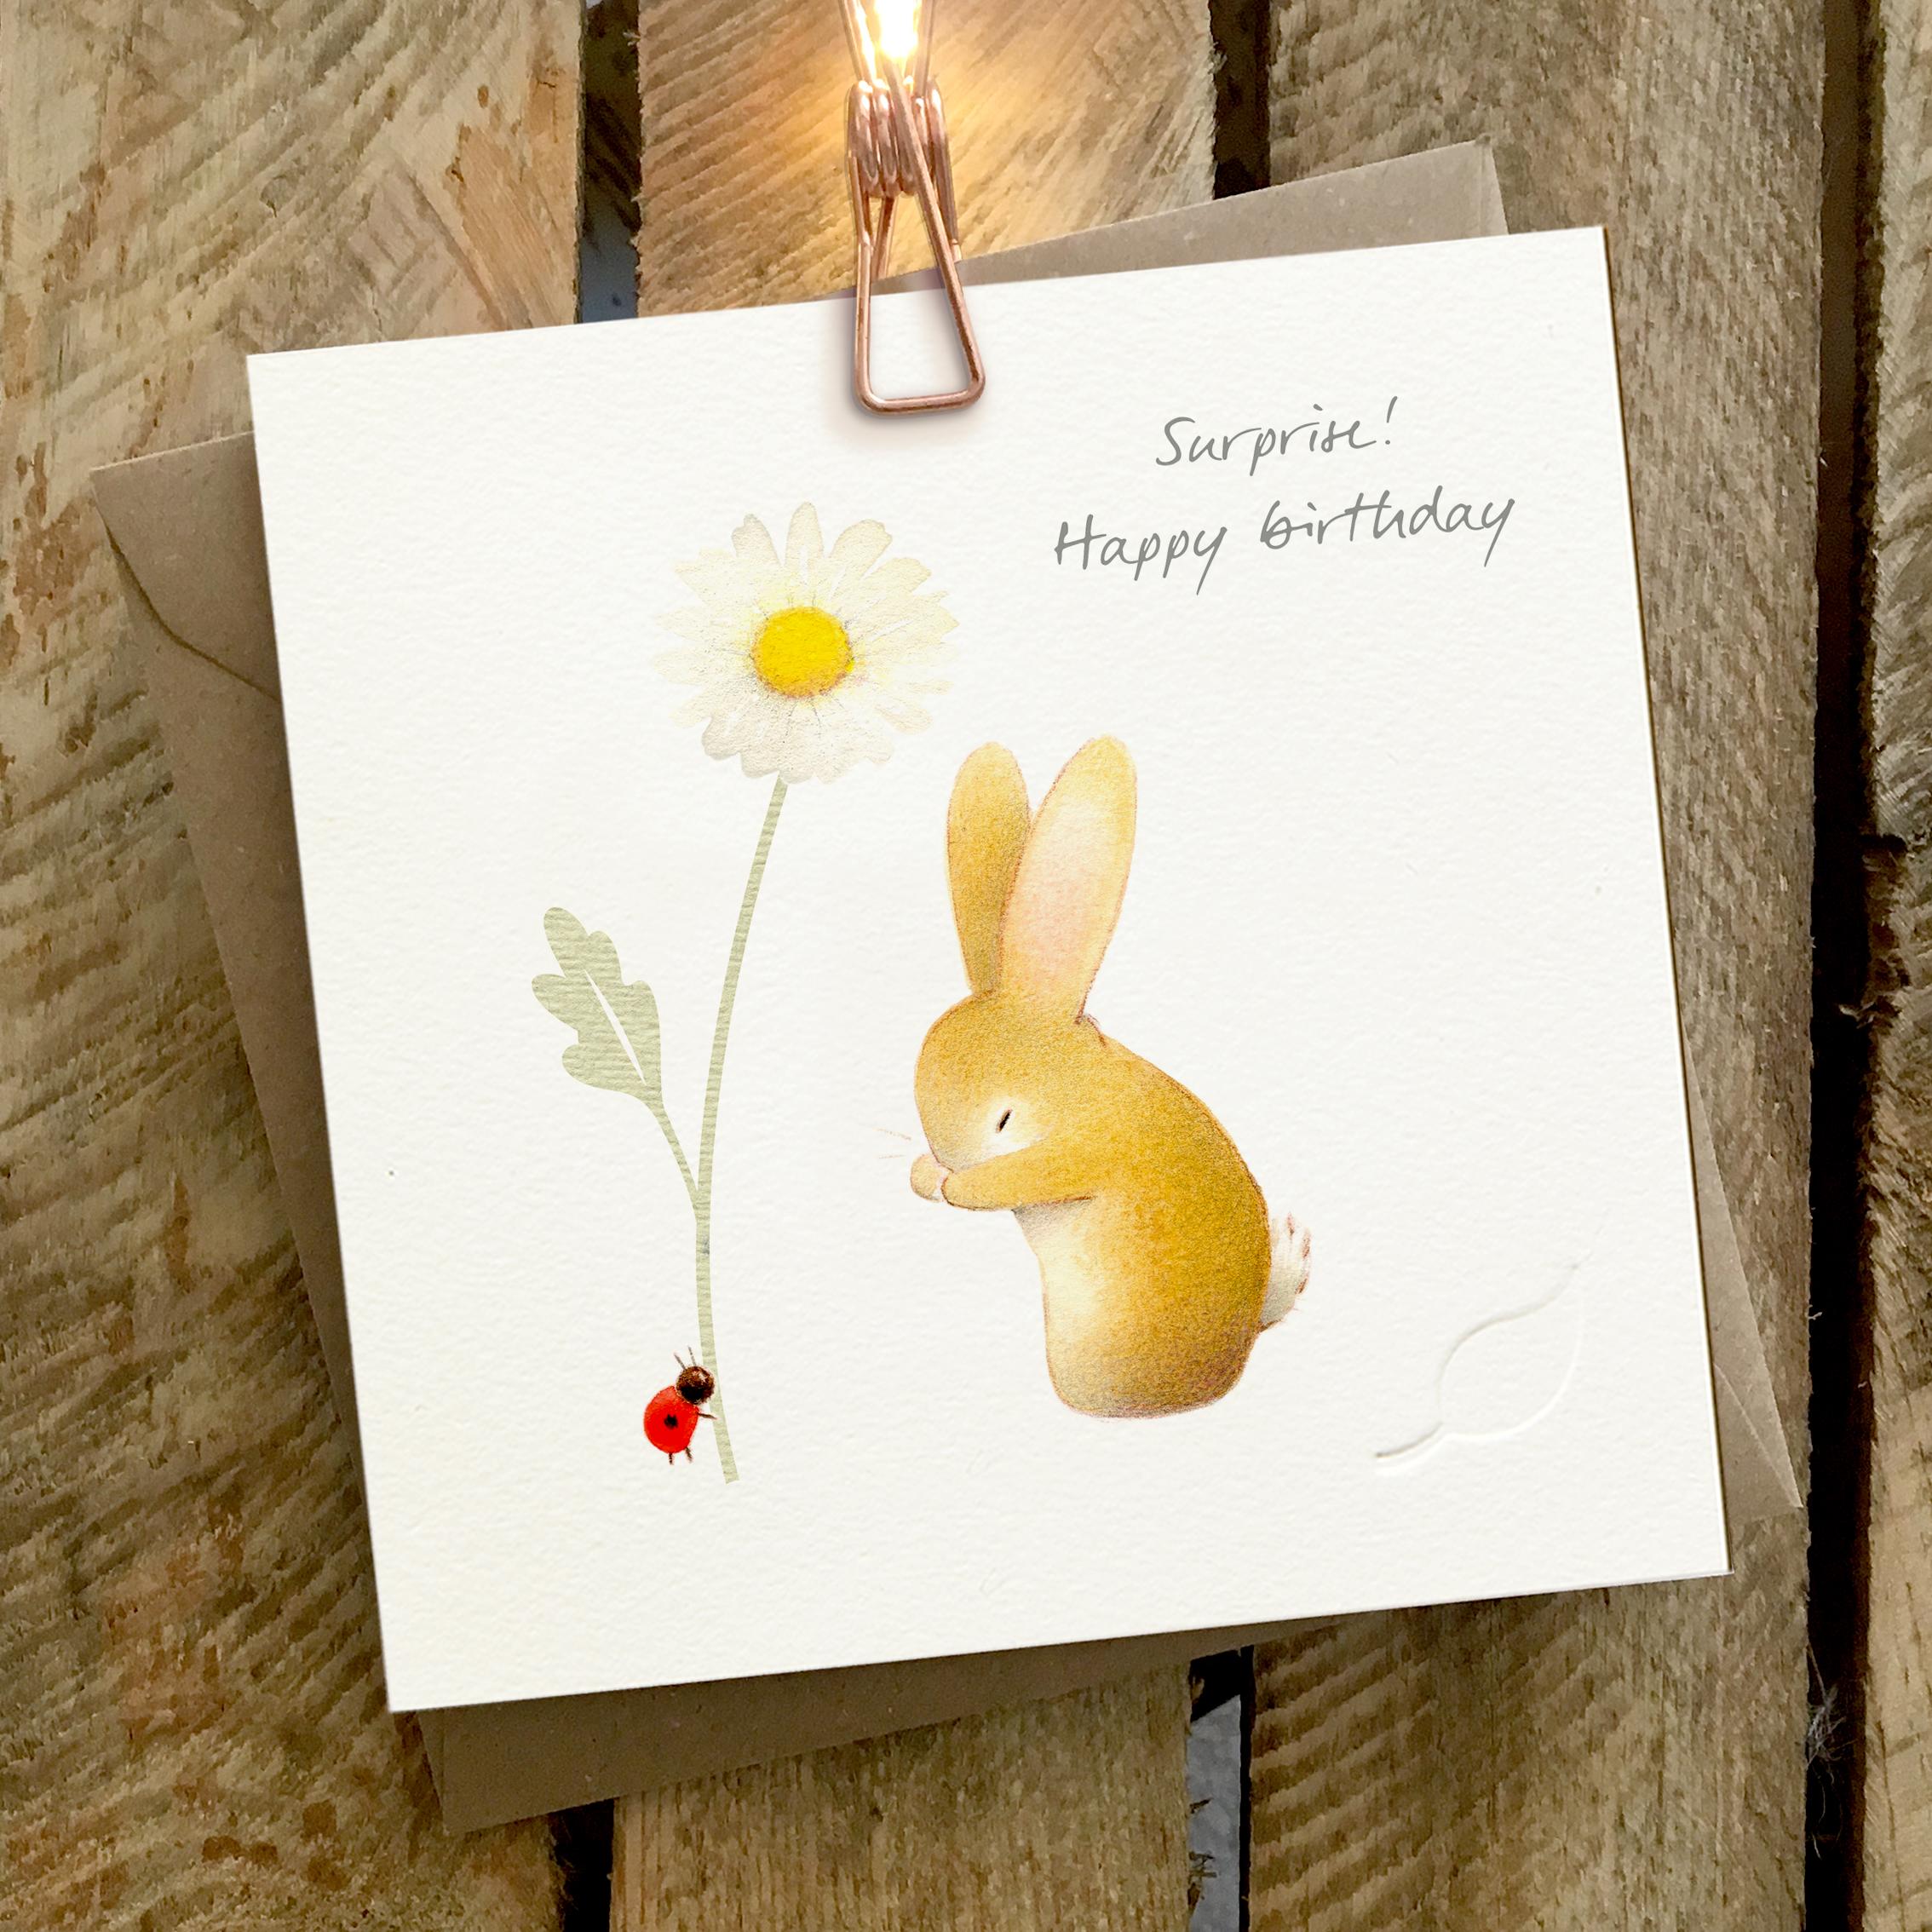 Card featuring a cute rabbit and a tiny ladybird. Caption reads “Surprise! Happy birthday”